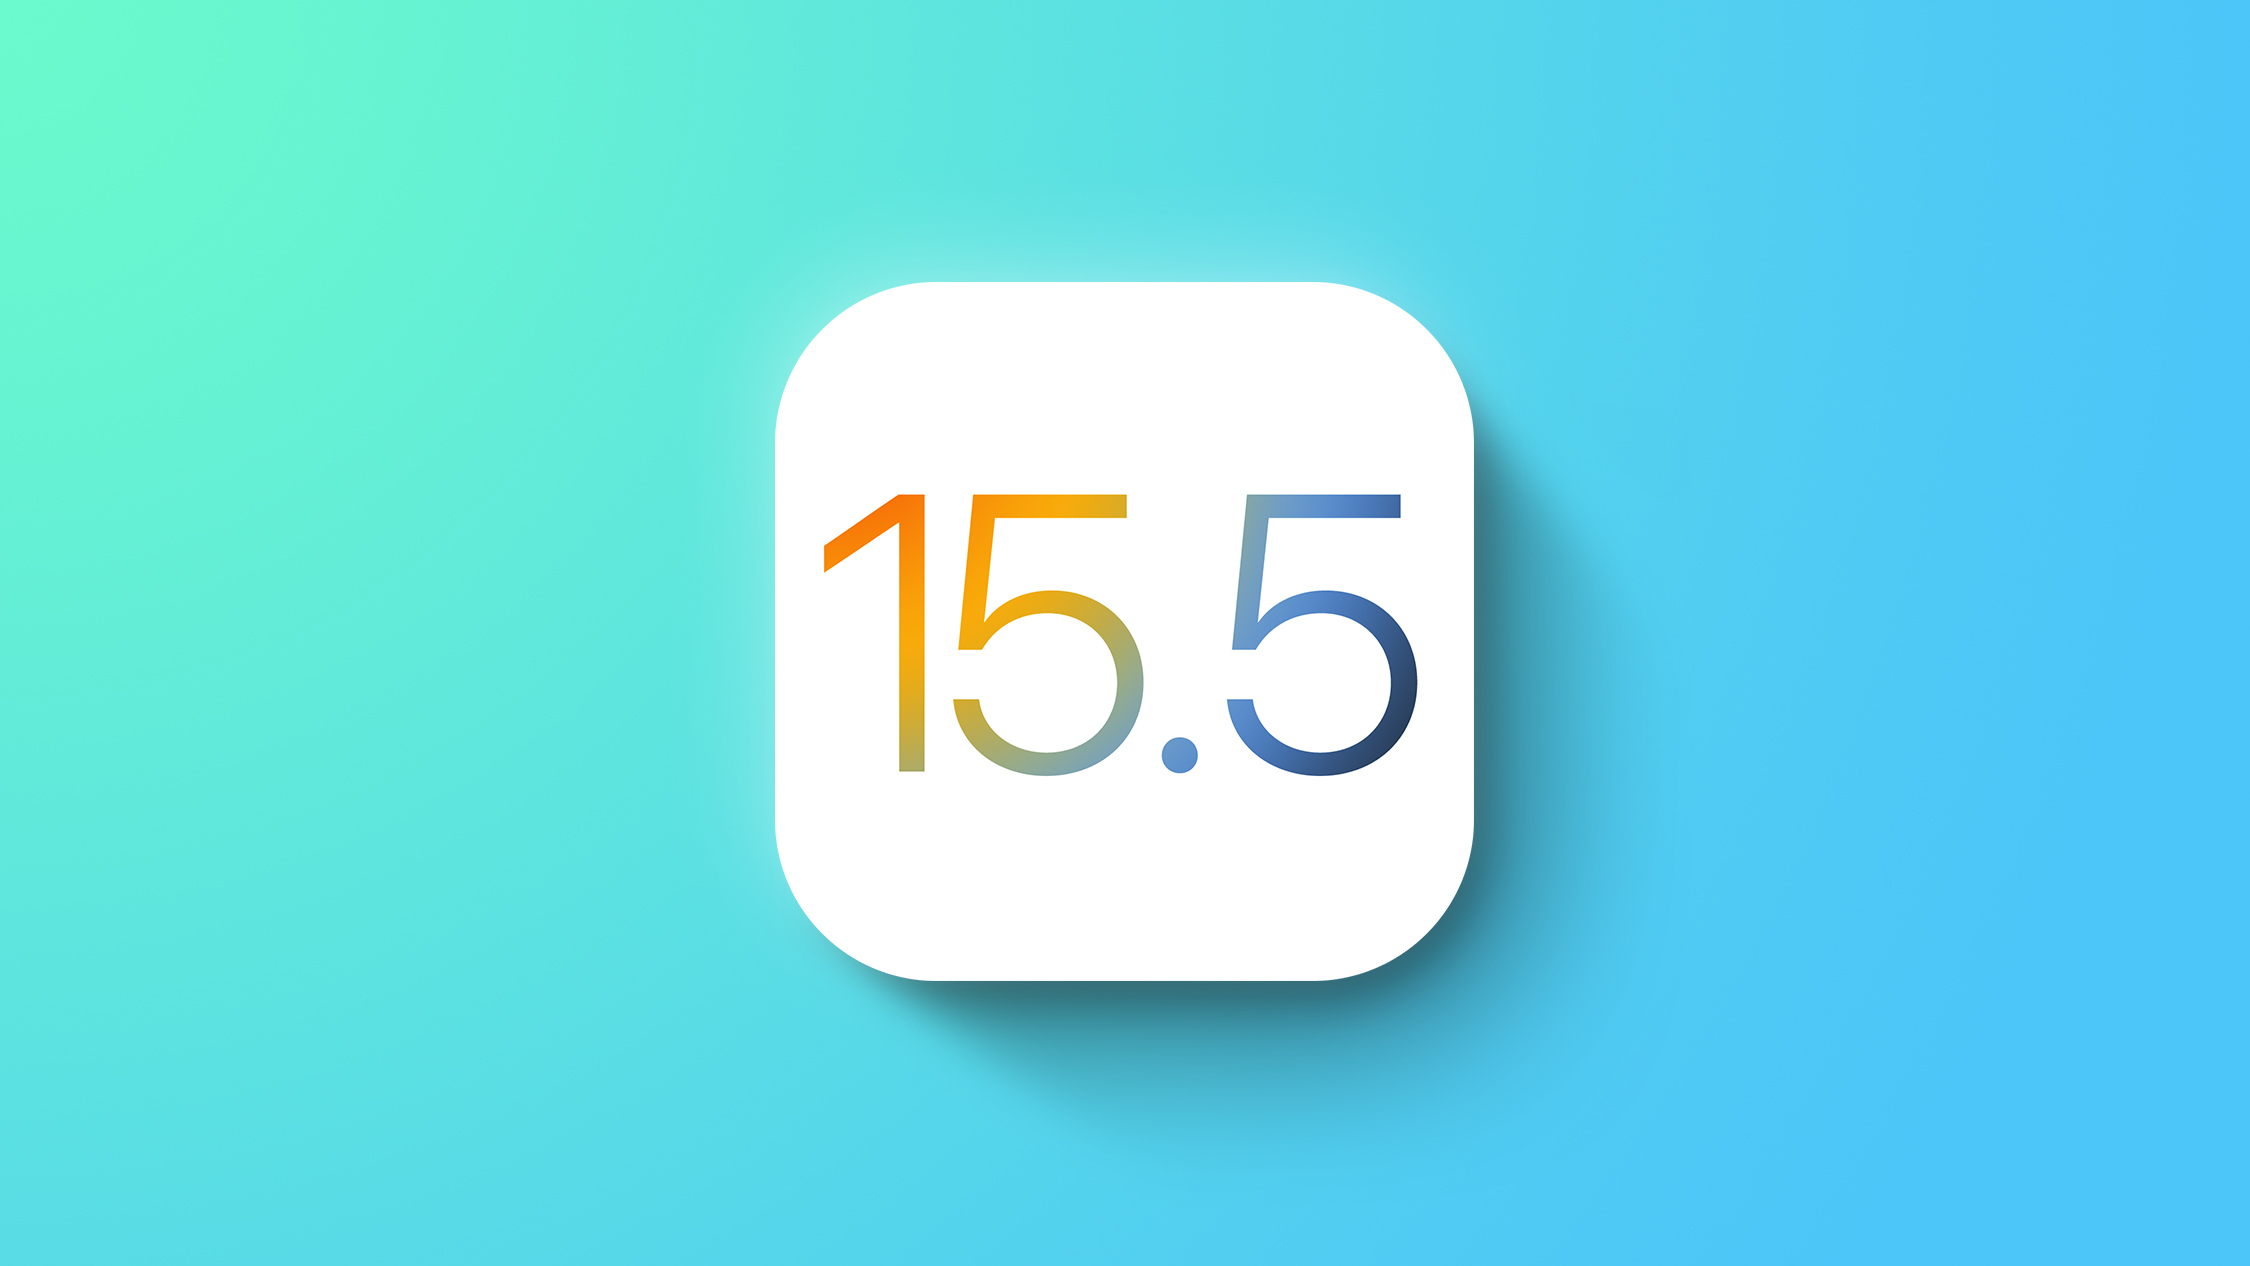 Apple Seeds Second Betas of iOS 15.5 and iPadOS 15.5 to Developers